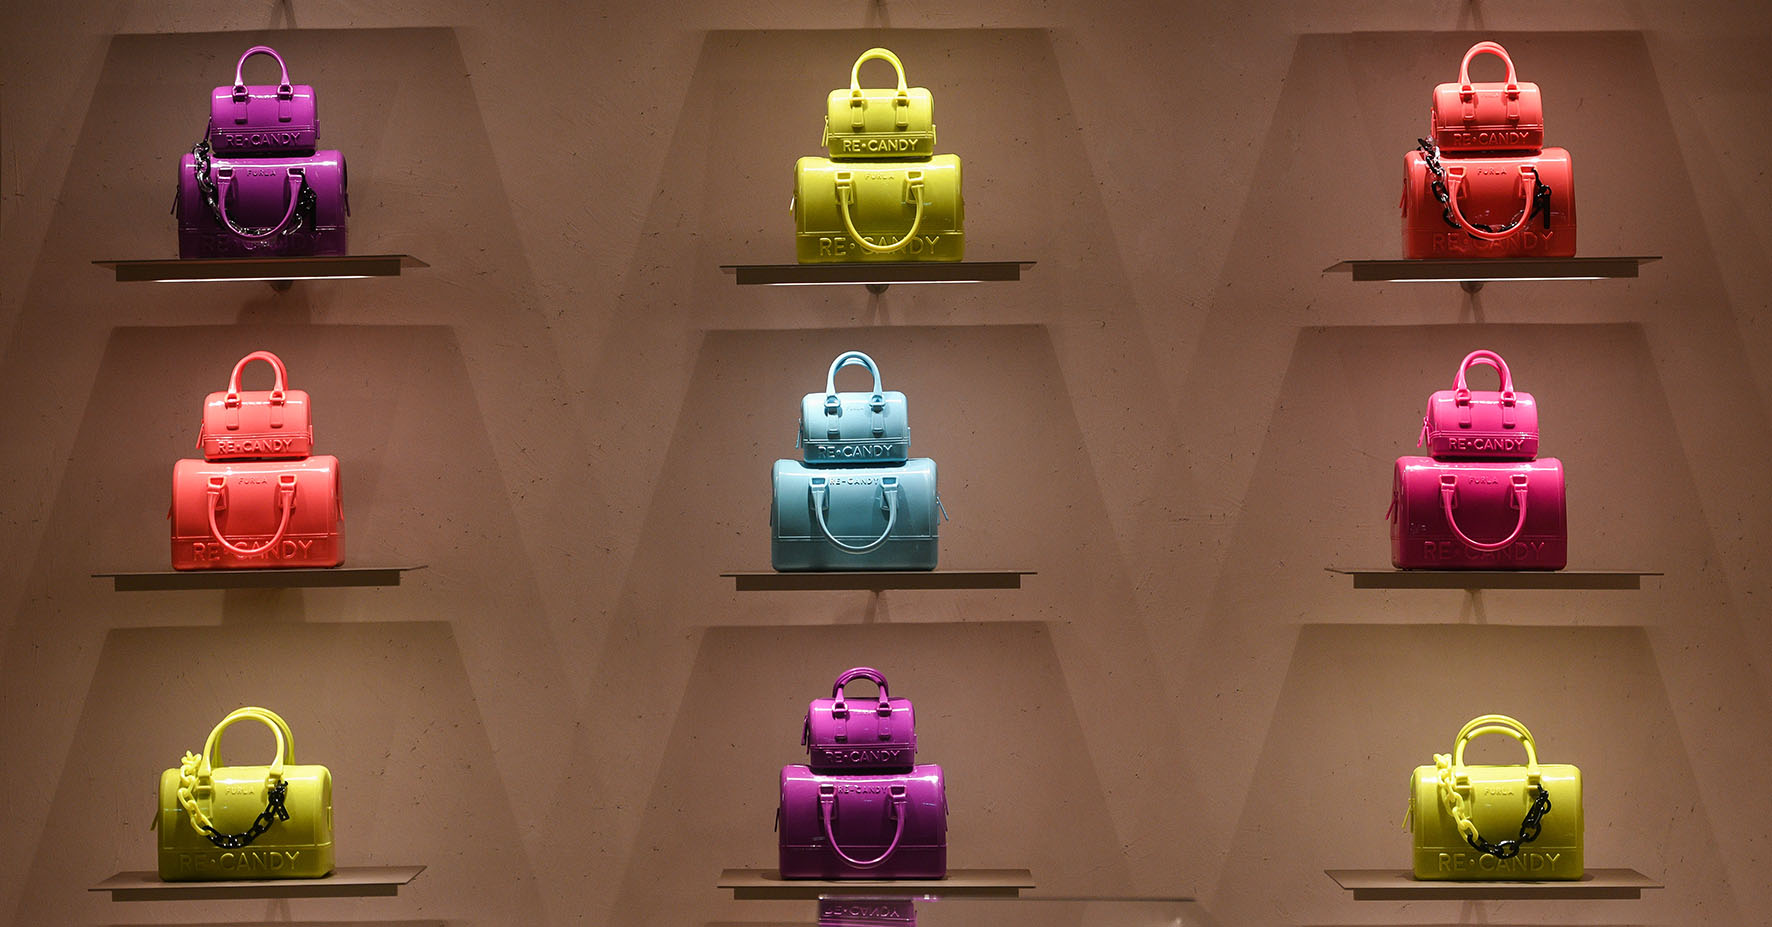 Furla Japan Becomes Less Reliant on Paid Search